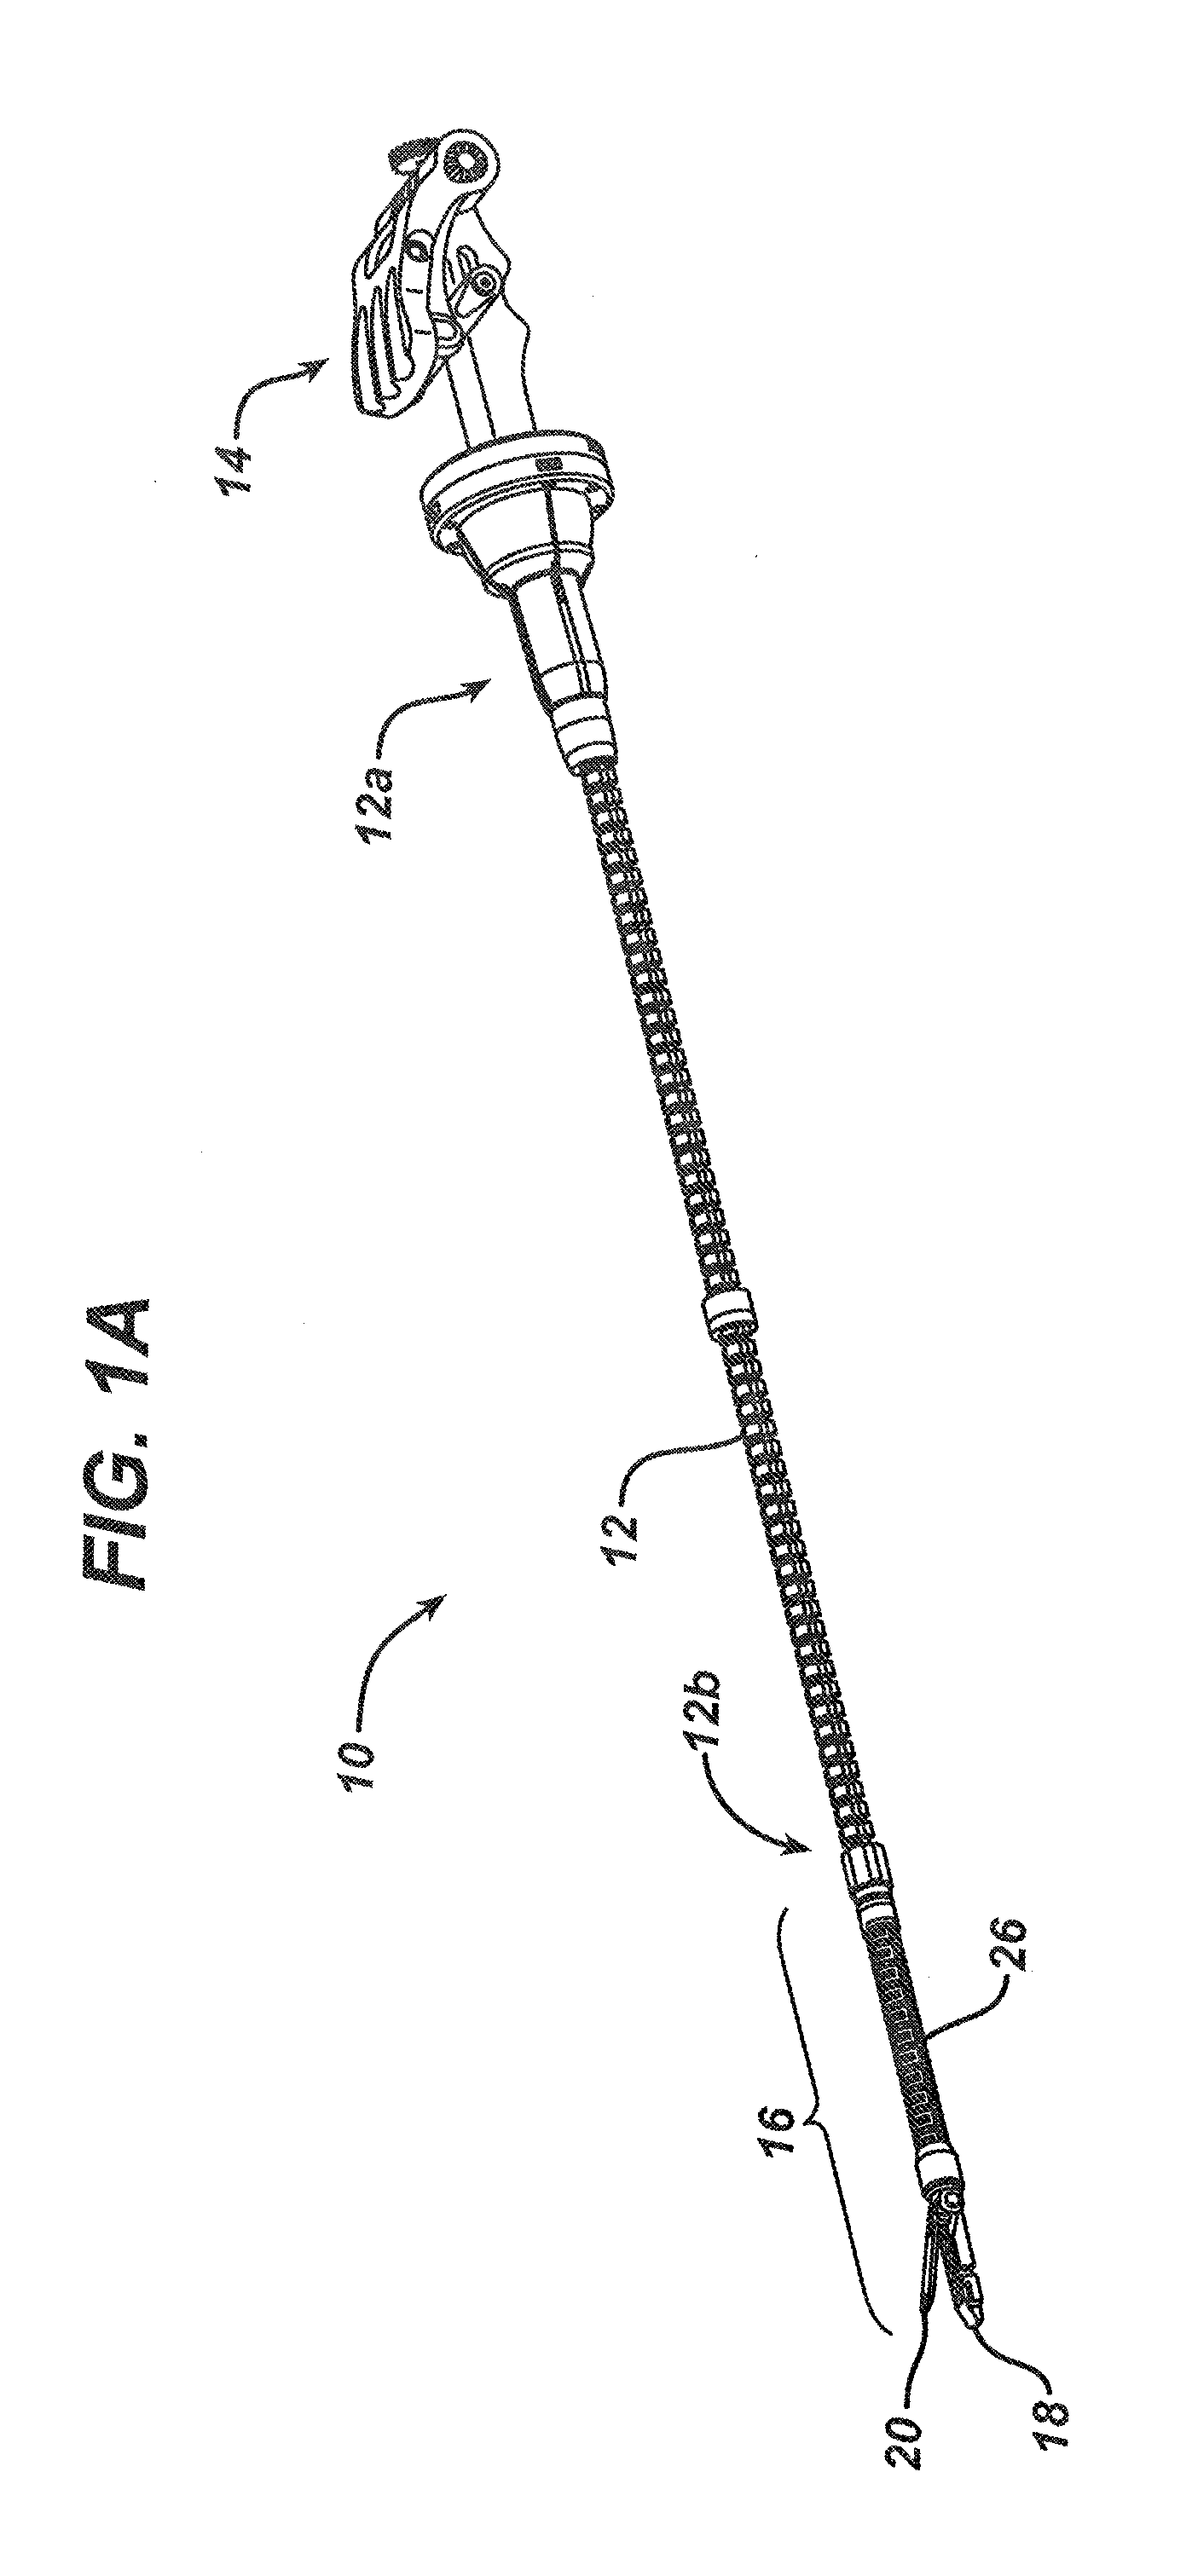 Robotically-controlled surgical instrument with selectively articulatable end effector